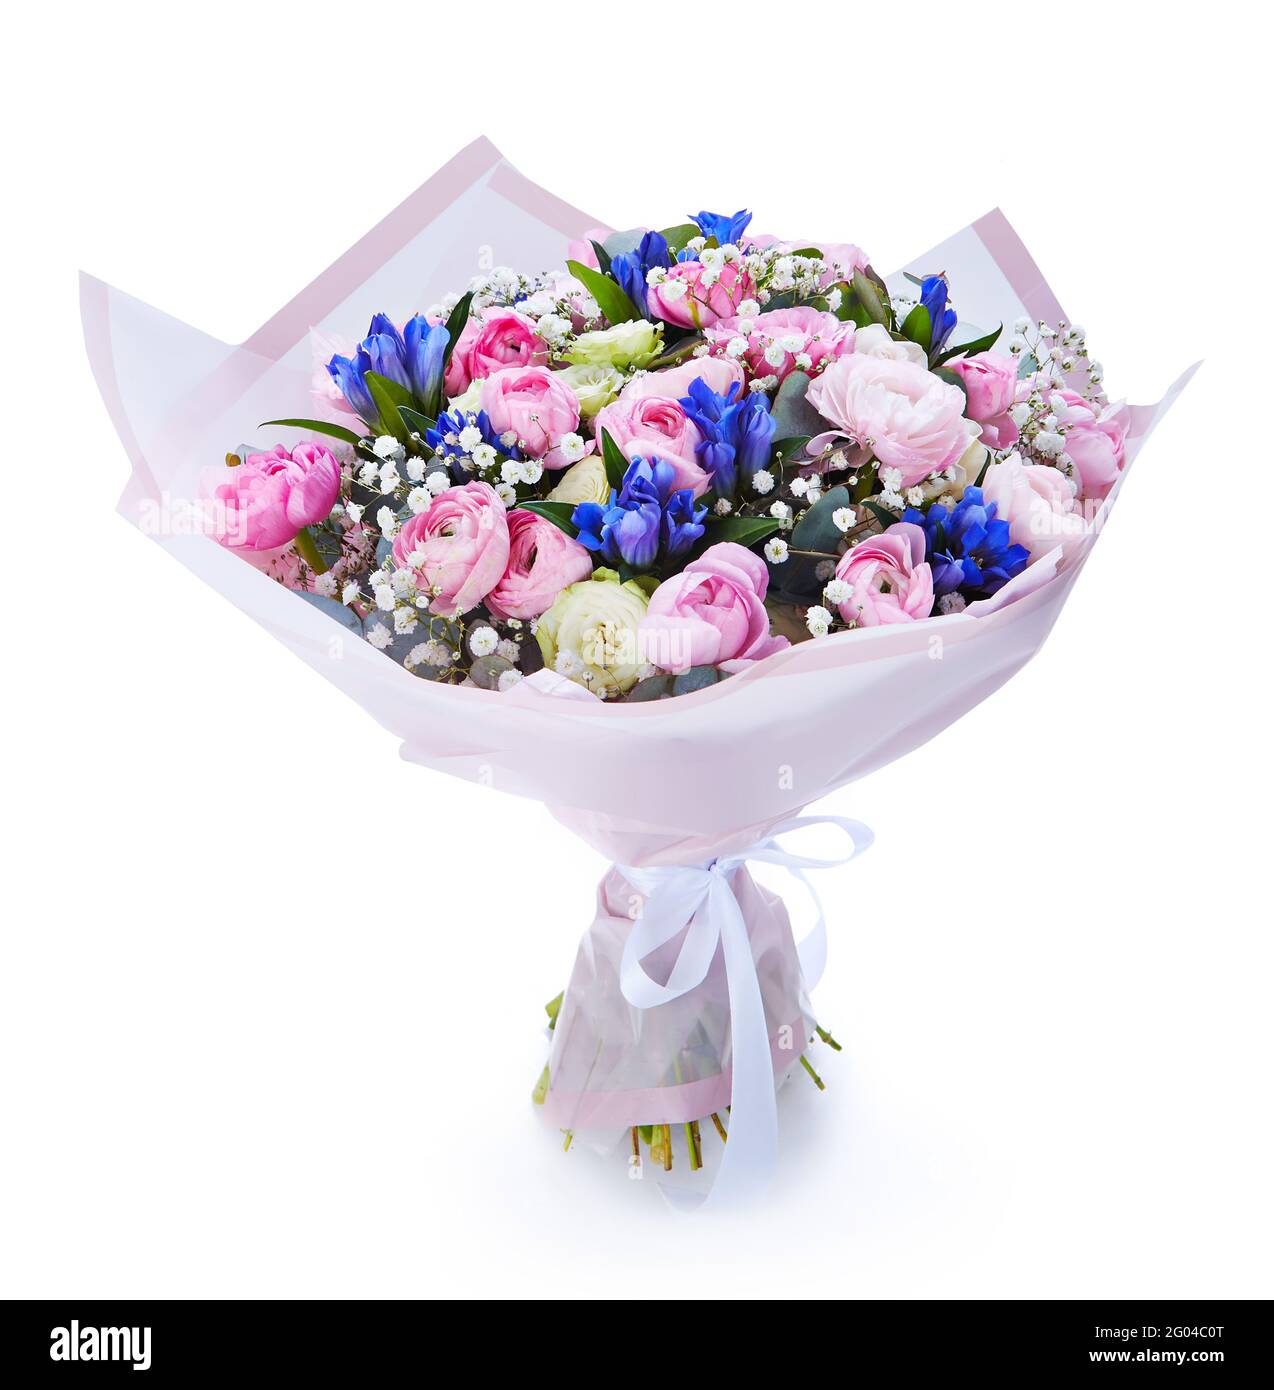 wedding bouquet  isolated on white. Fresh, lush bouquet of colorful flowers Stock Photo